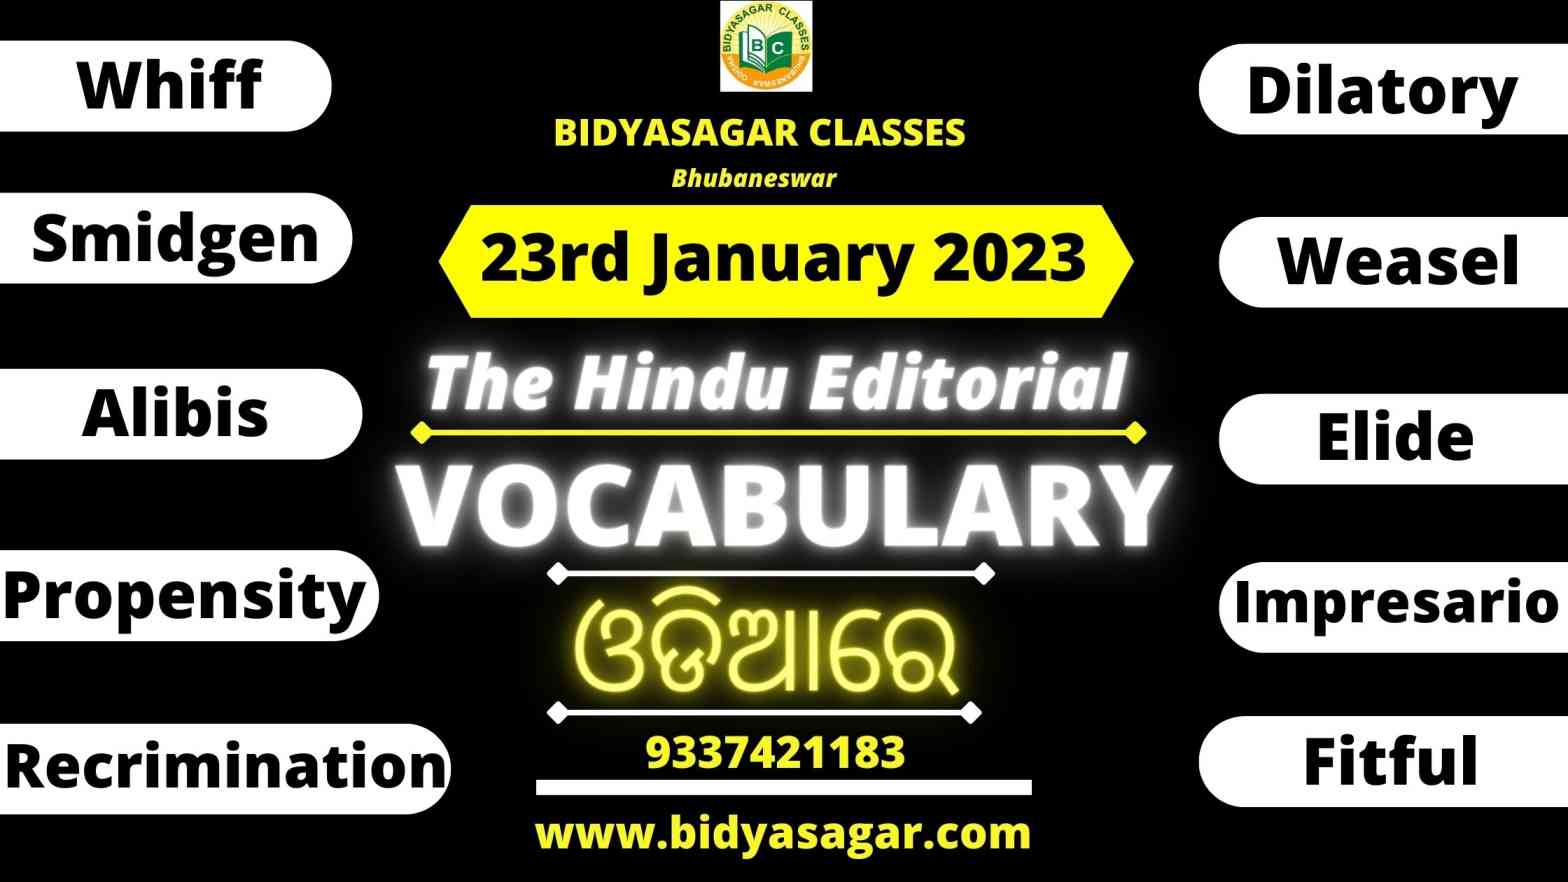 The Hindu Editorial Vocabulary of 23rd January 2023